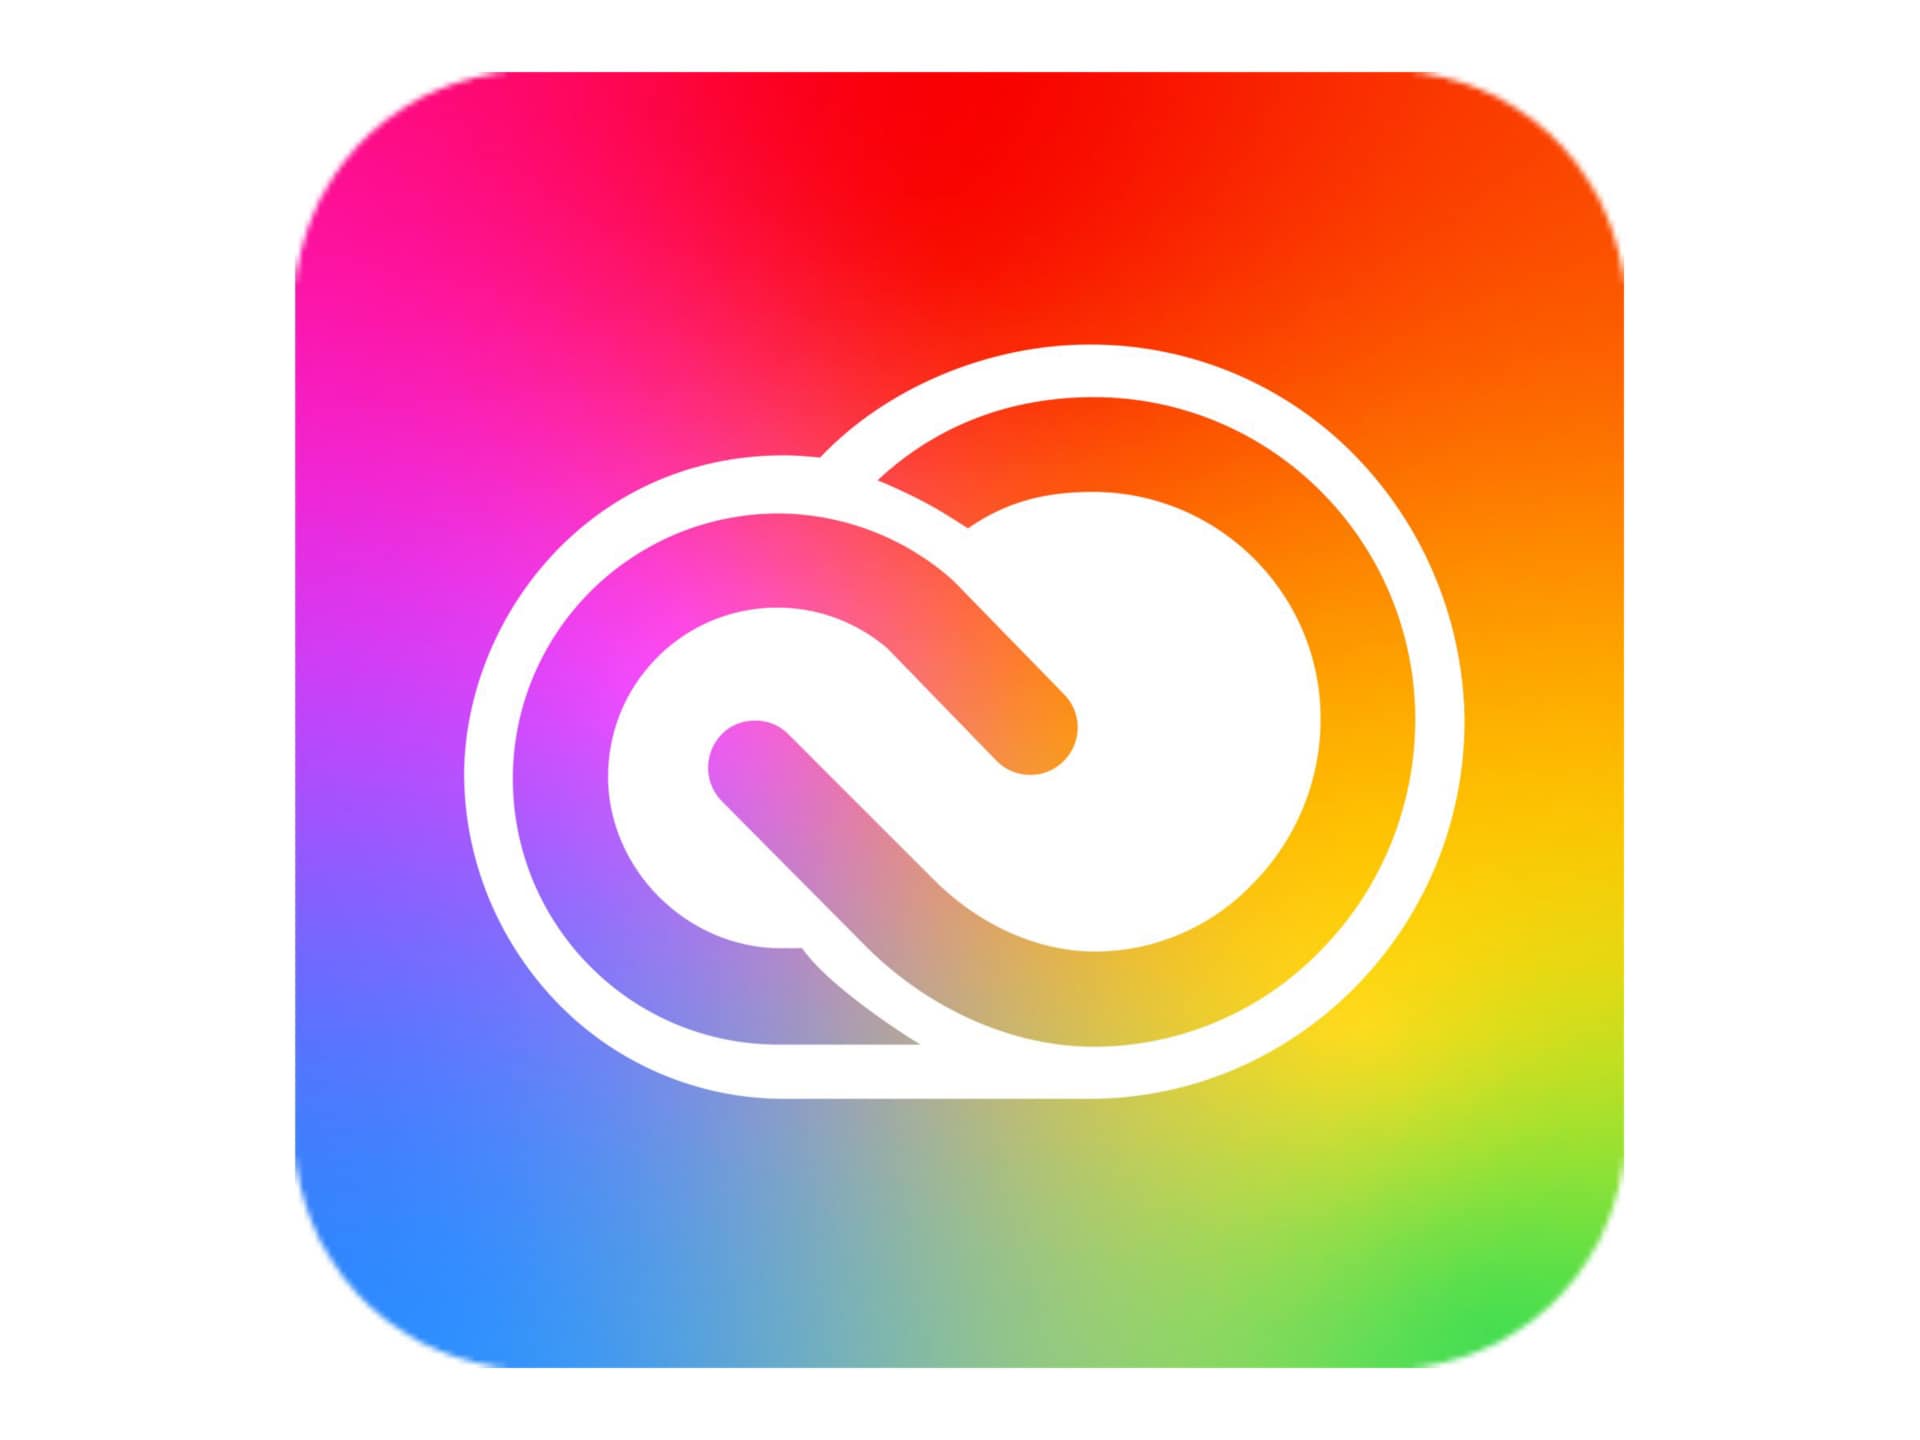 Adobe Creative Cloud for Enterprise - All Apps - Subscription New (28 months) - 1 named user